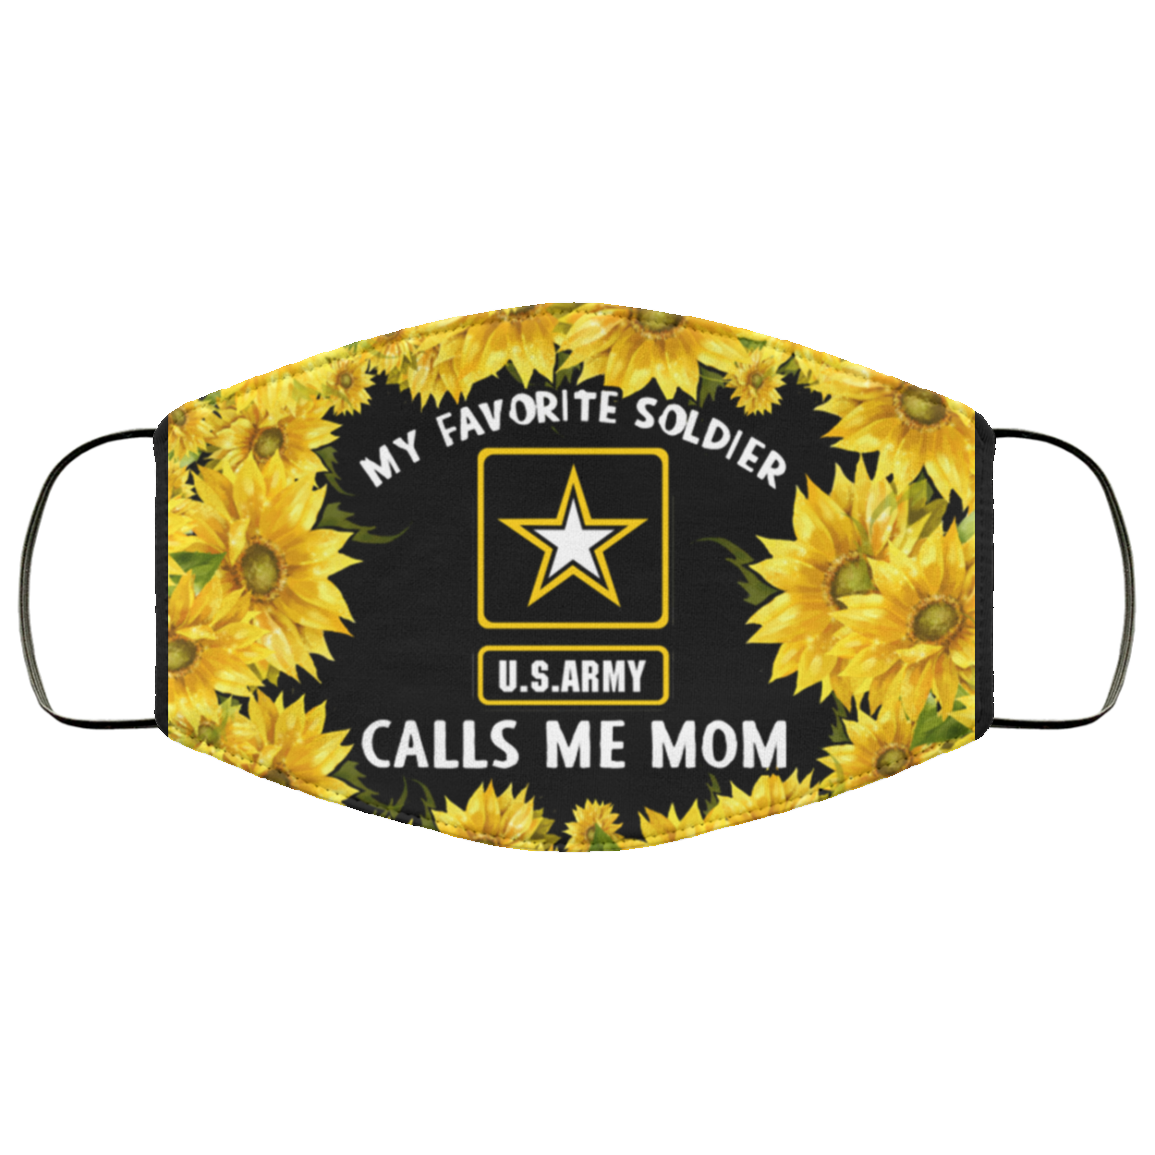 My Favorite Soldier Calls Me Mom Face Mask - Sunflowers